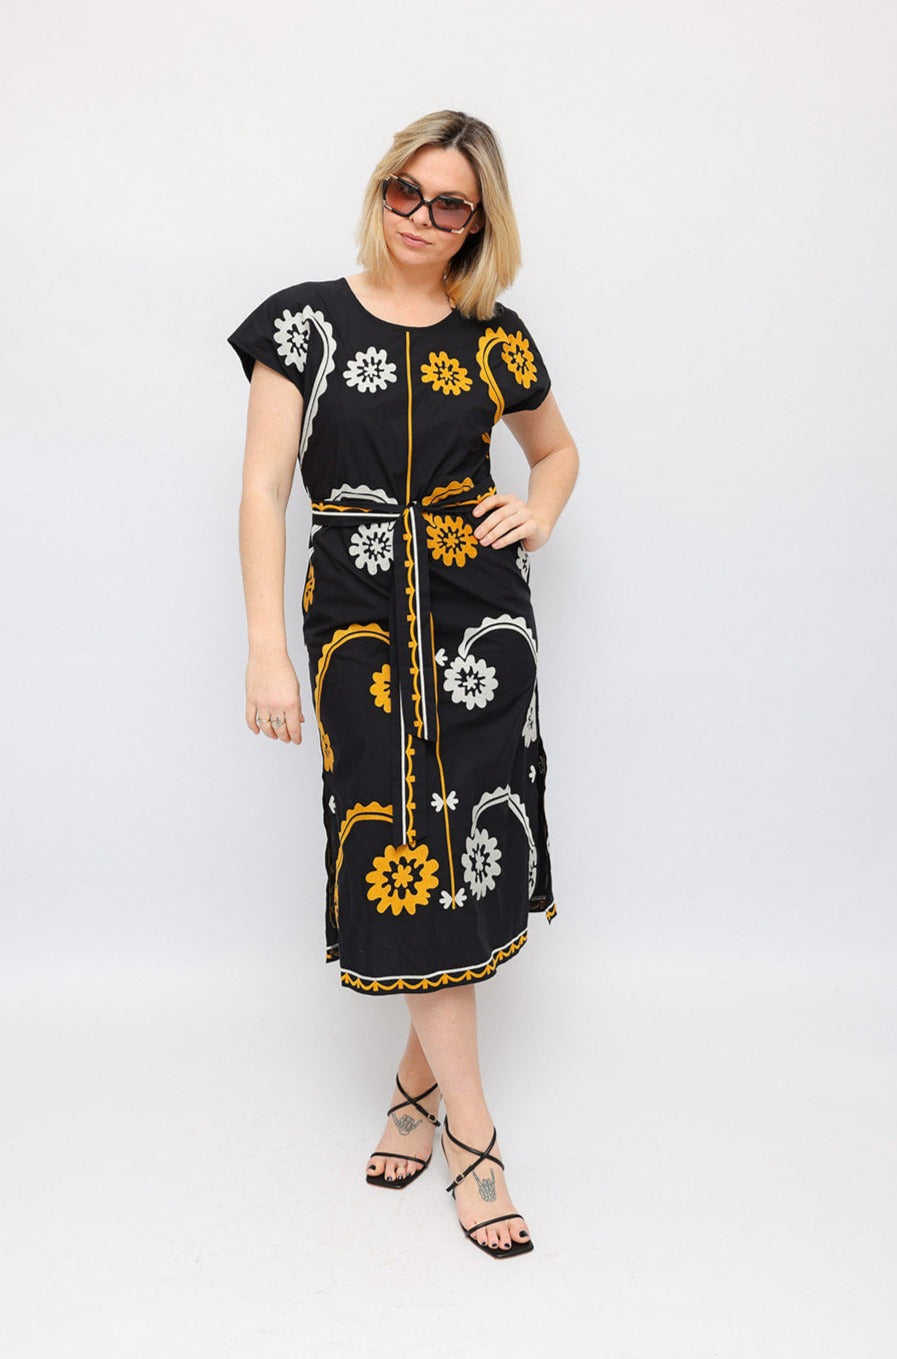 Tory Burch Black Embroidered Dress